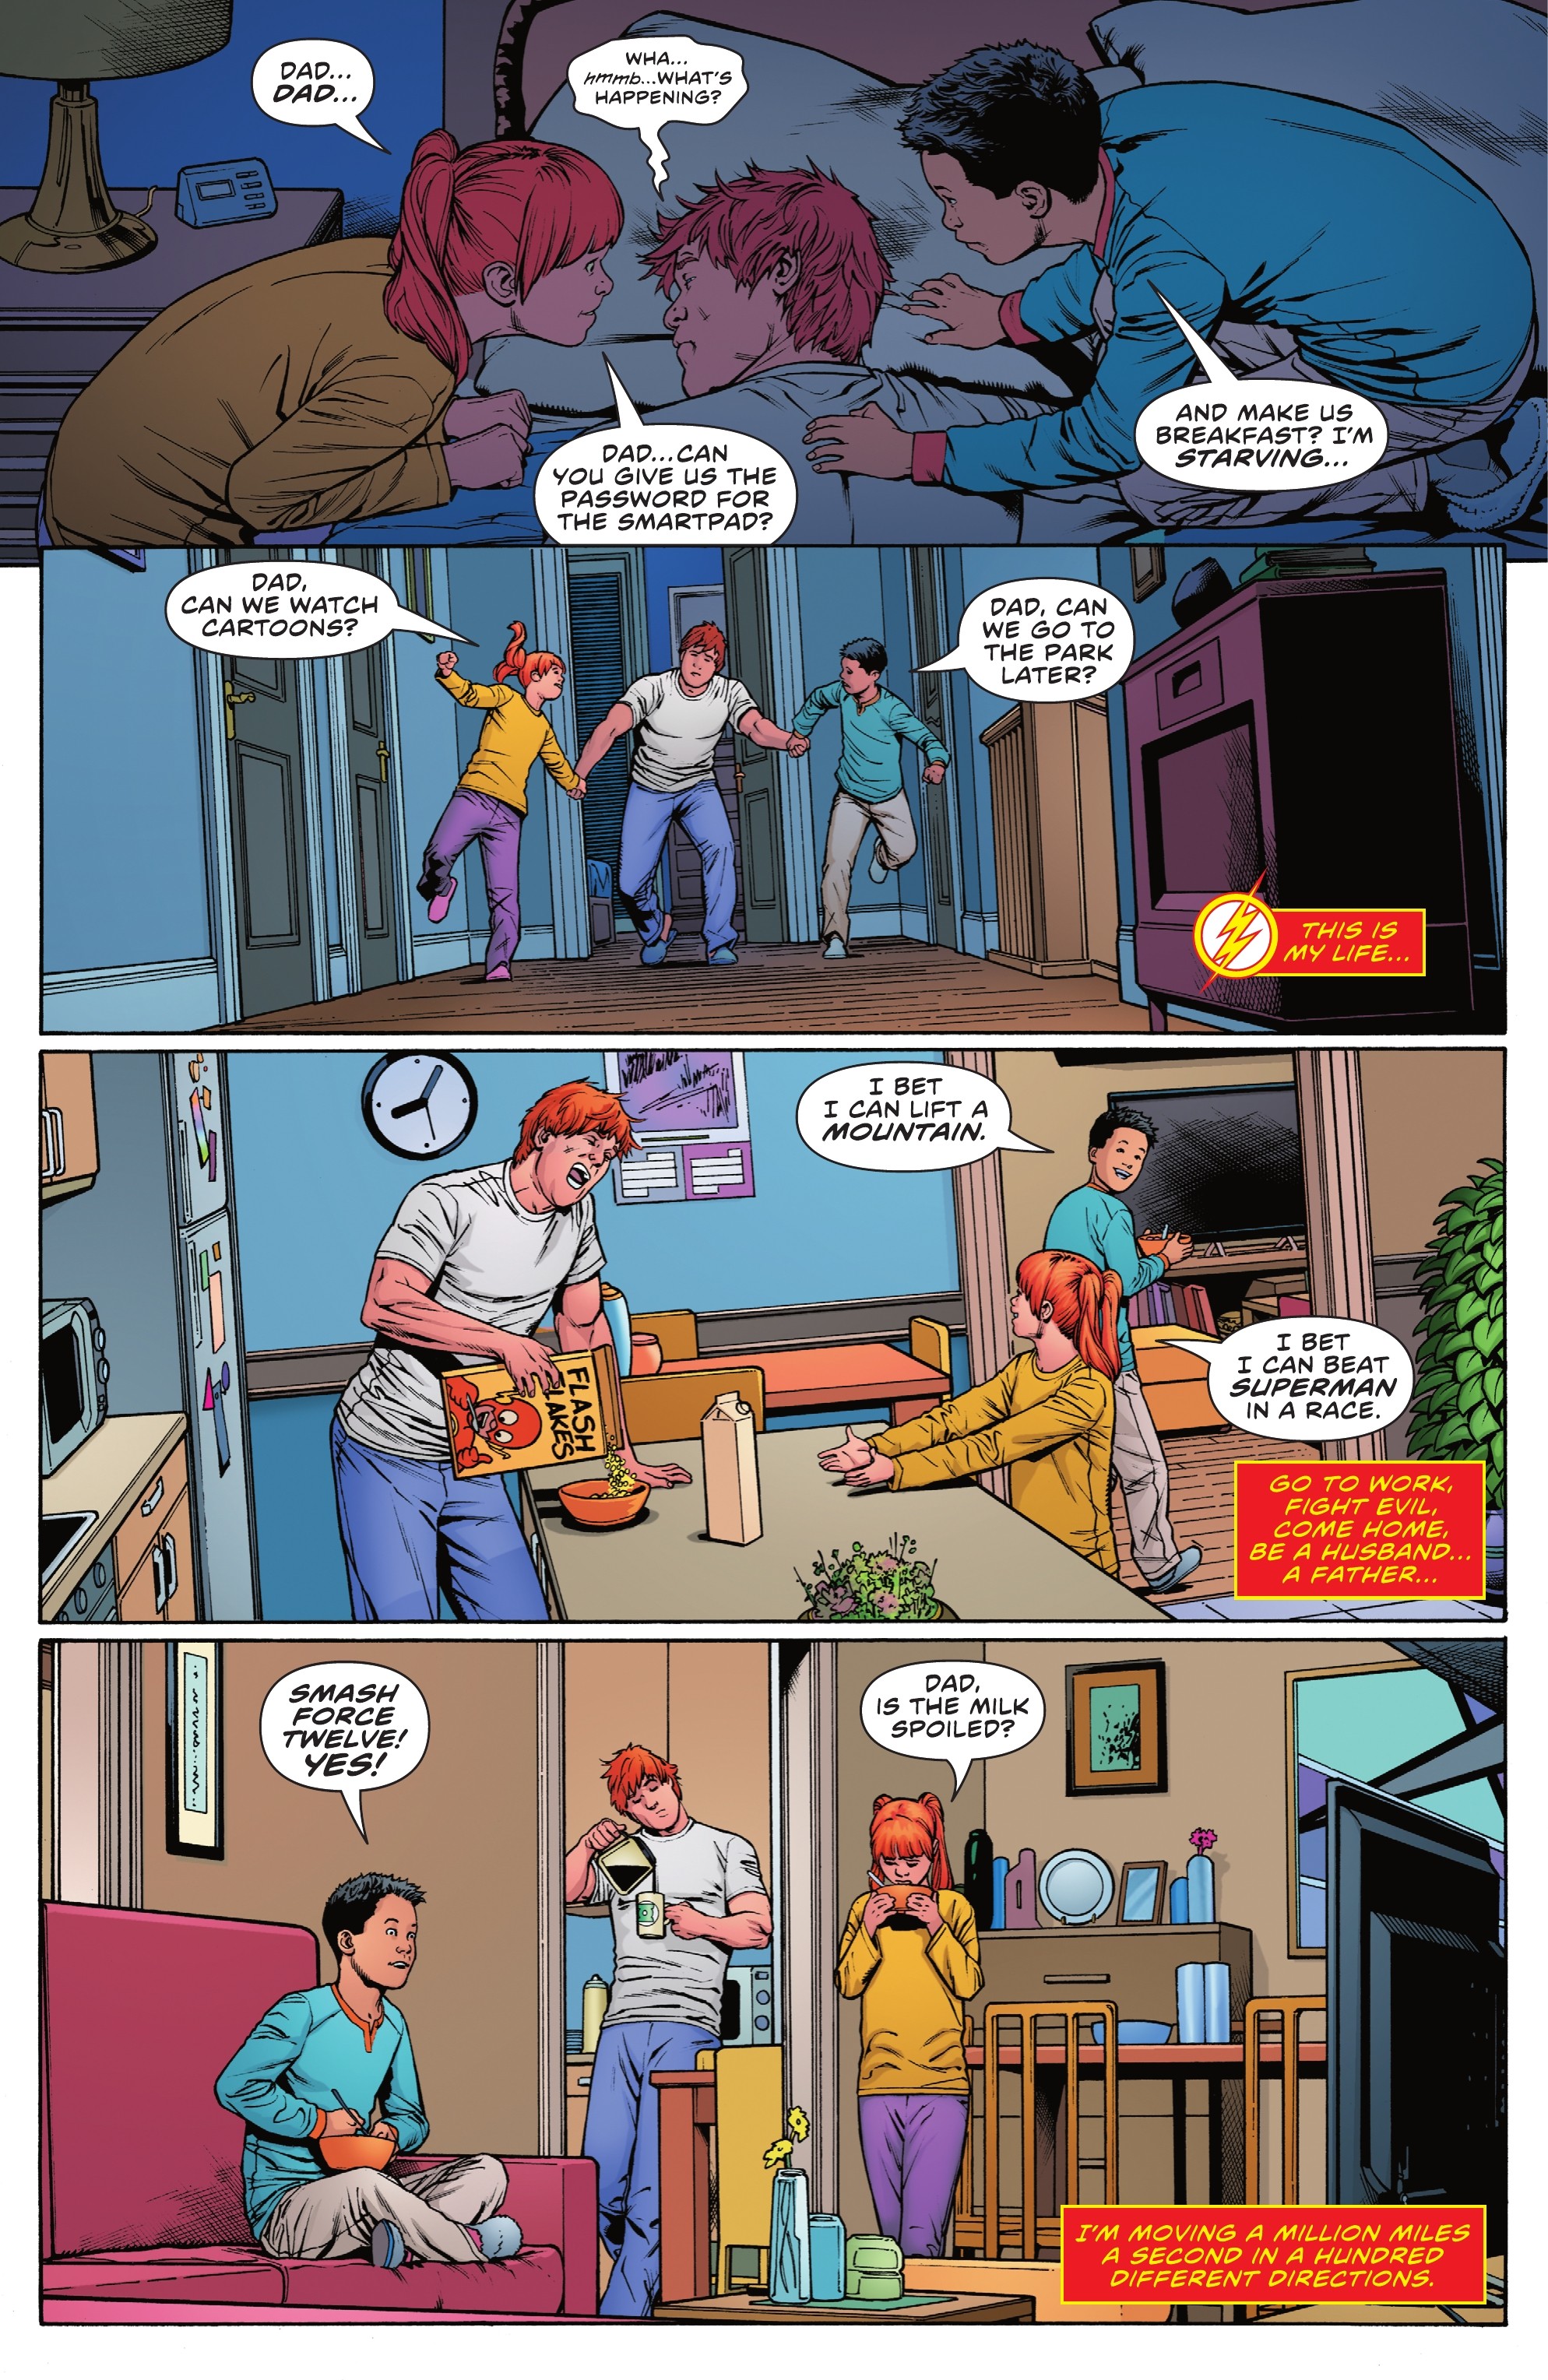 The Flash (2016-): Chapter 787.1 - Page 3